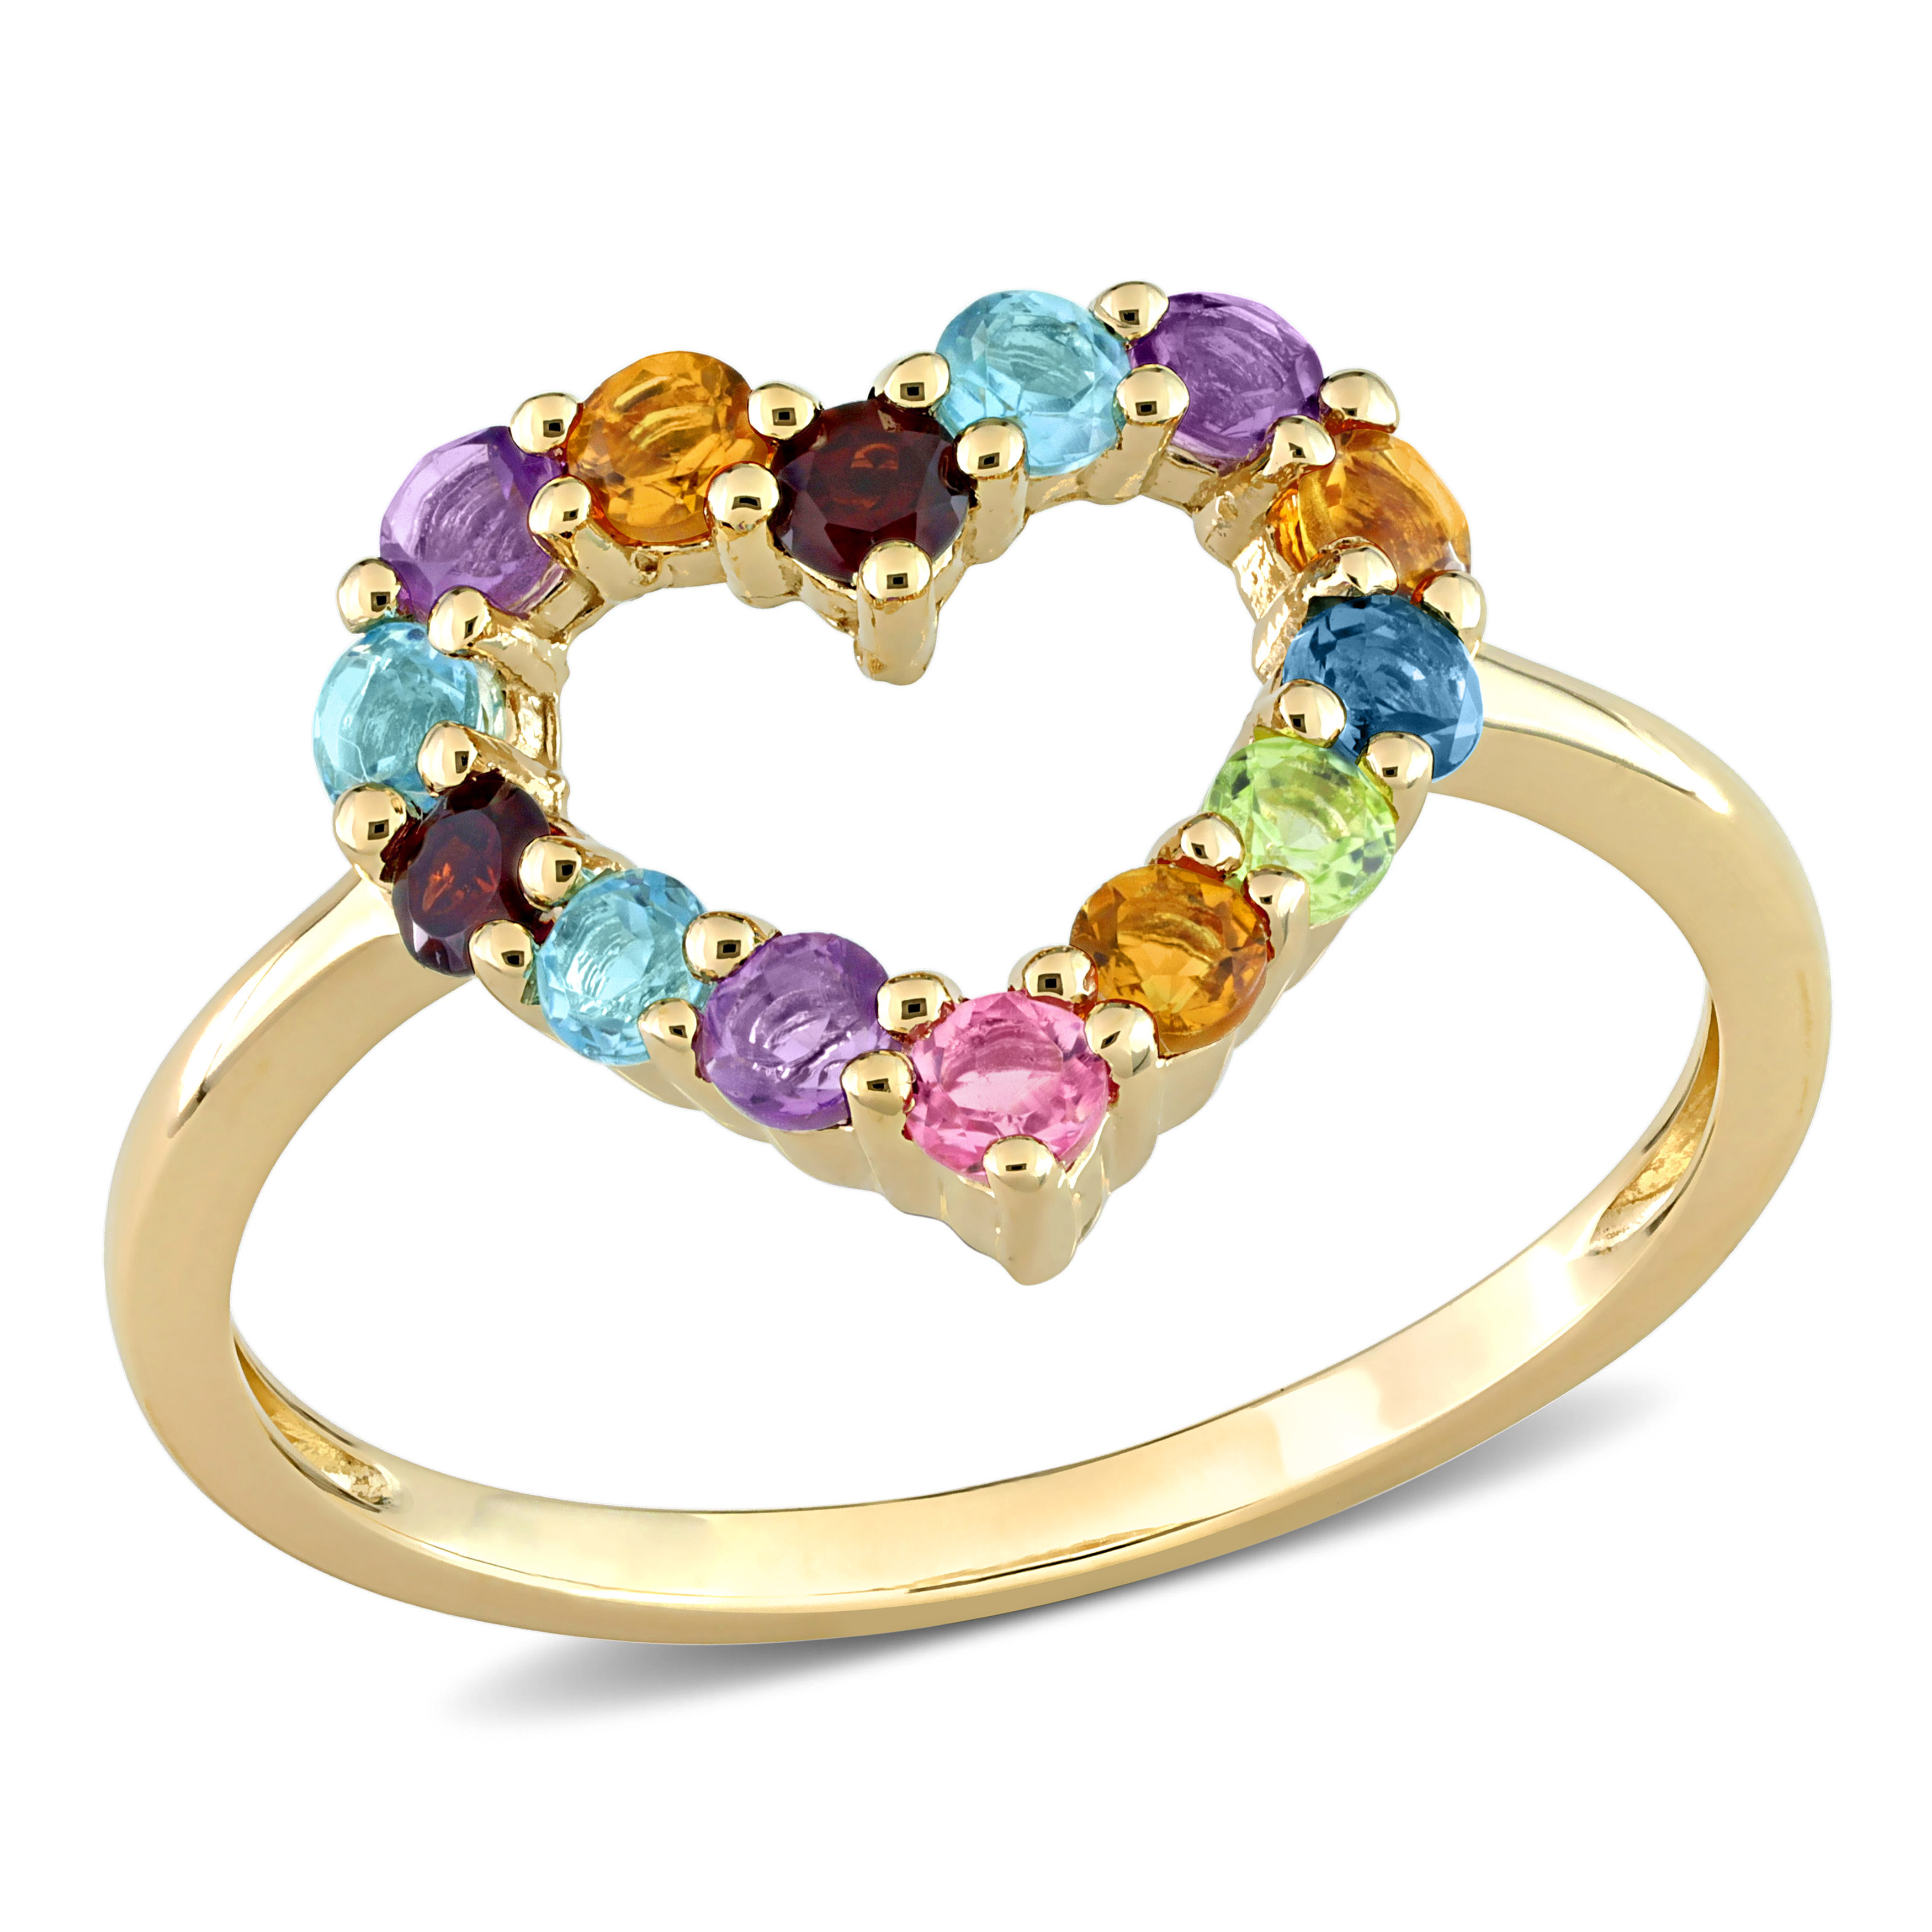 3/4 CT TGW Multi-Color Gemstones Open Heart Ring in 10k Yellow Gold